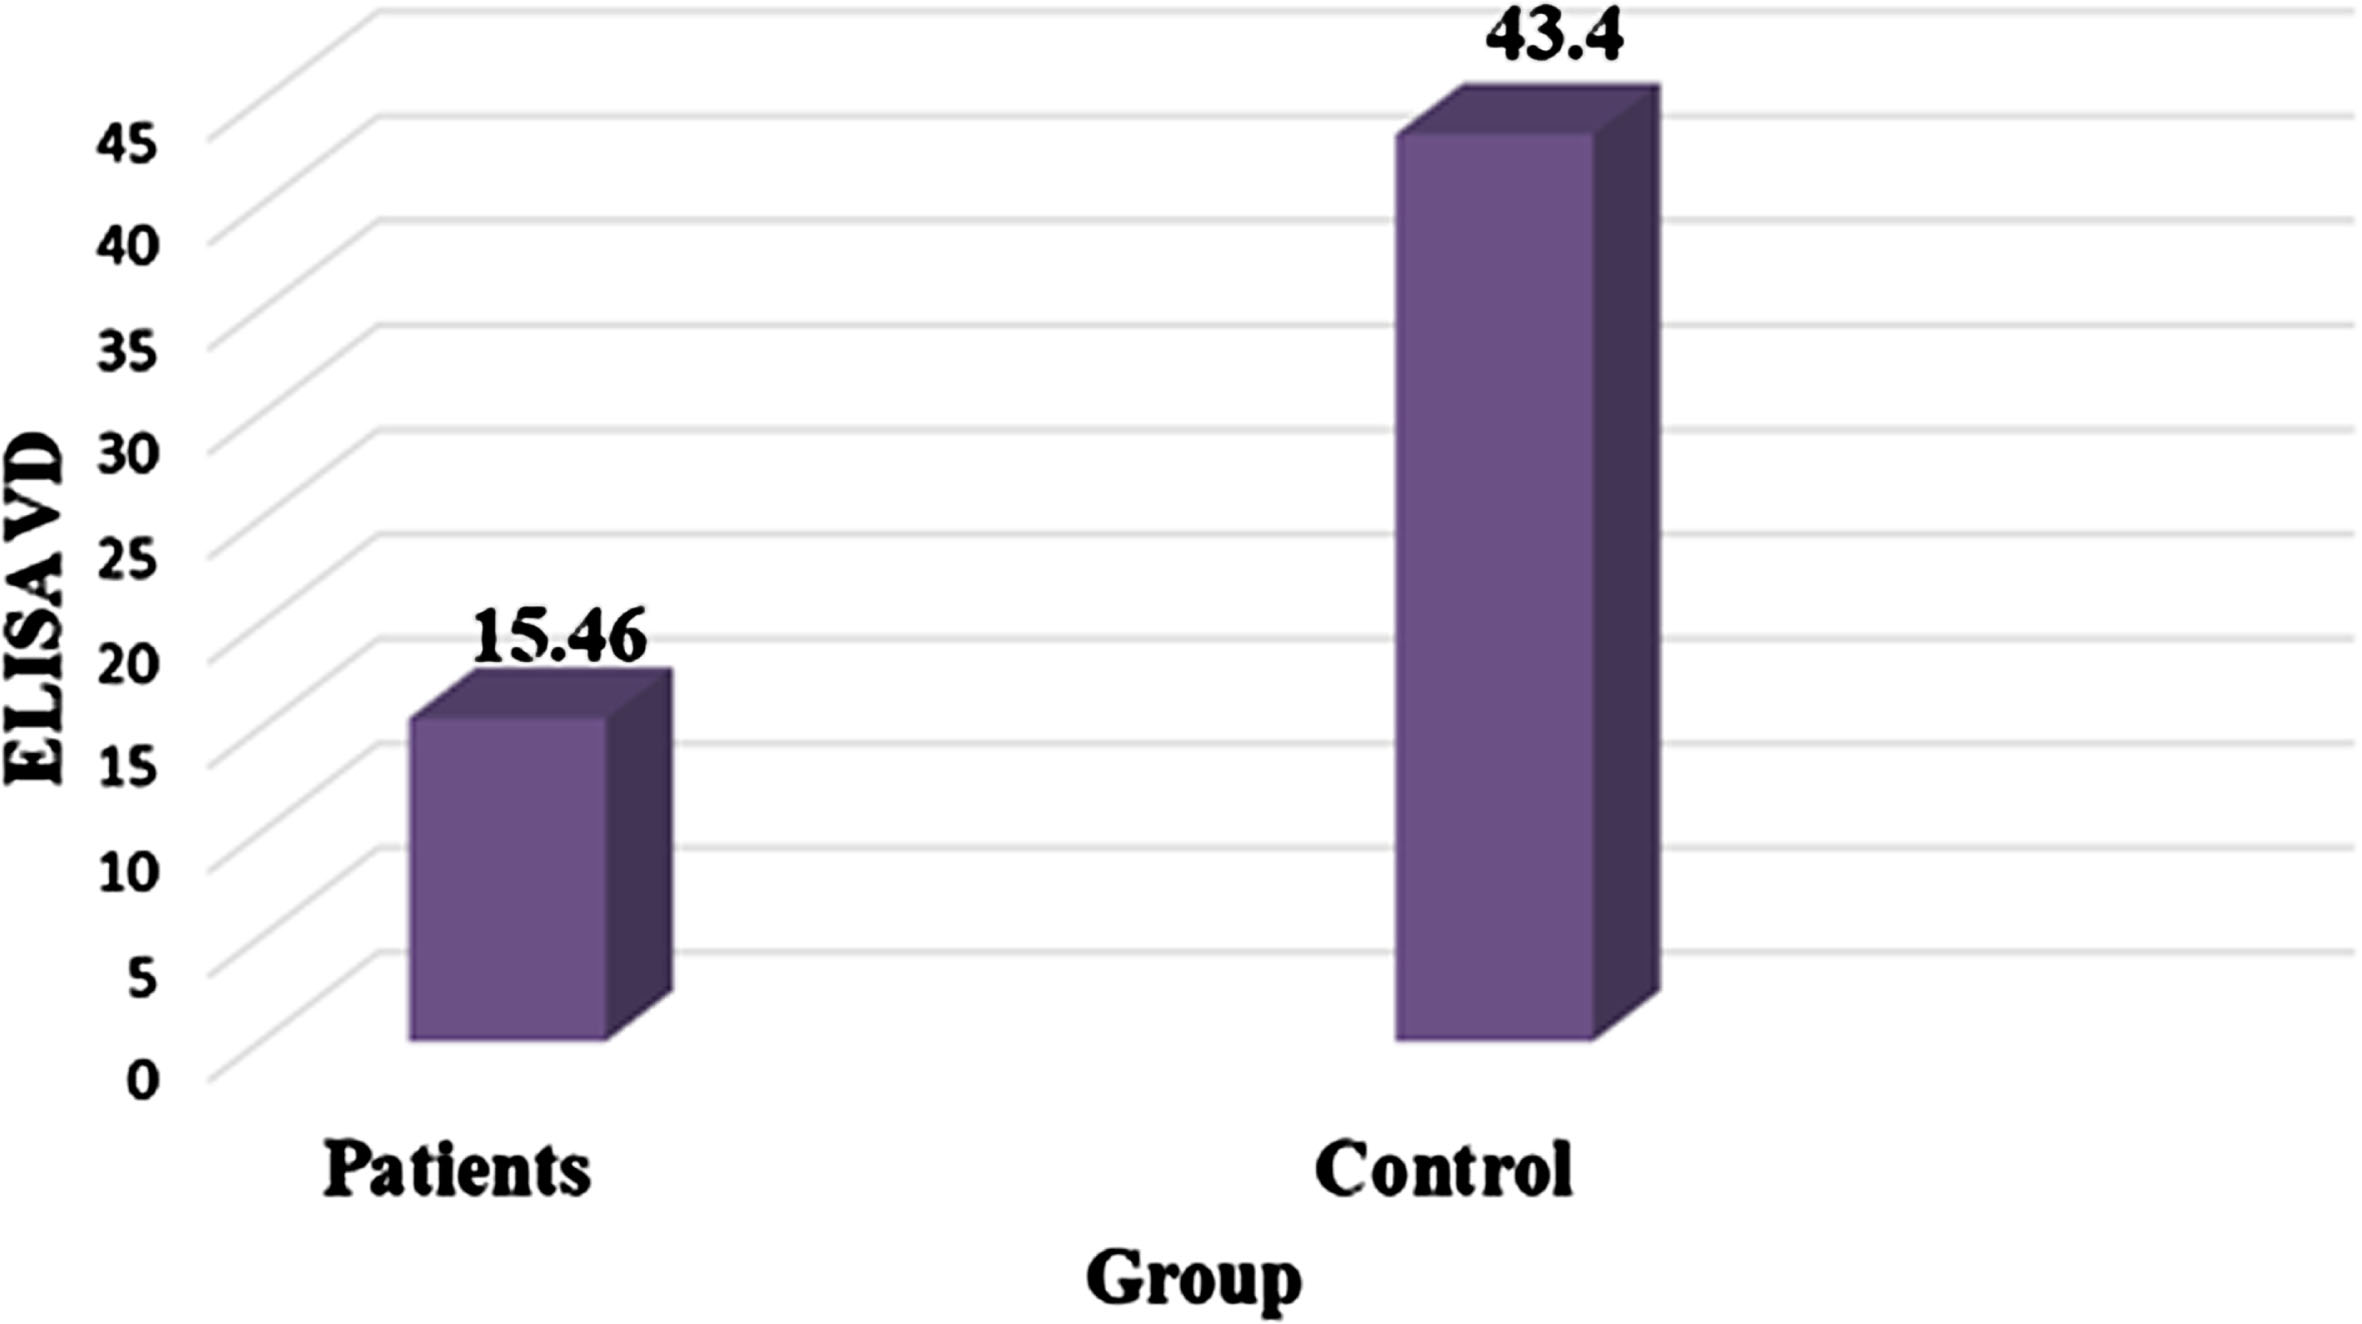 Comparison between serum VD level in MS patients and control group.